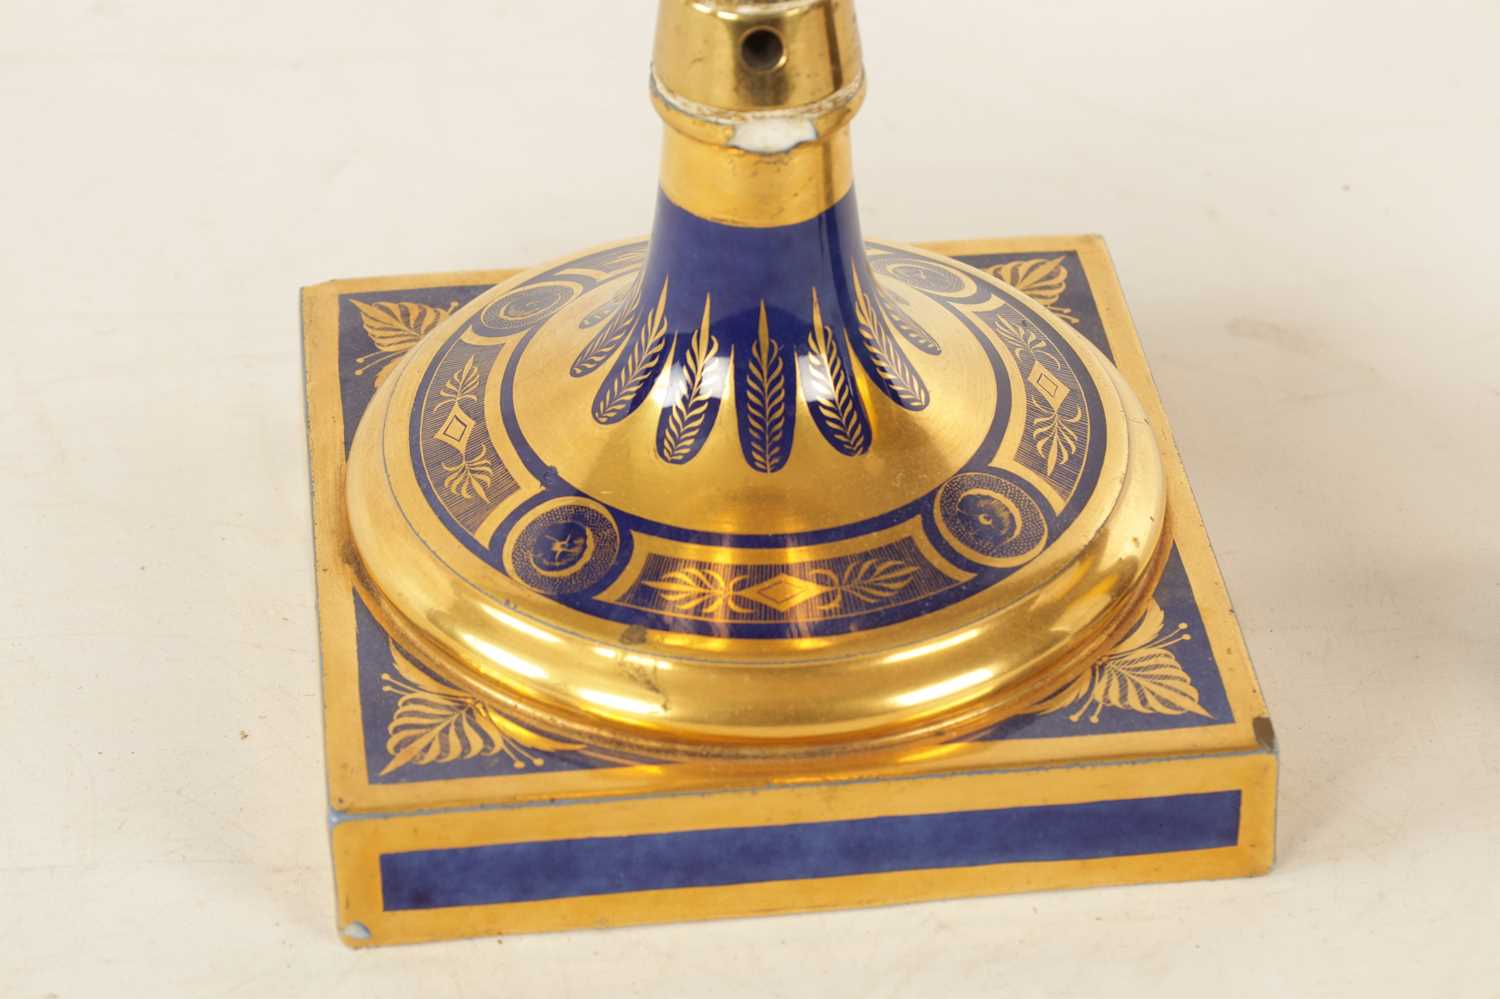 AN EARLY 19TH CENTURY FRENCH PARIS PORCELAIN ROYAL BLUE AND GILT URN SHAPED PEDESTAL VASE - Image 5 of 8